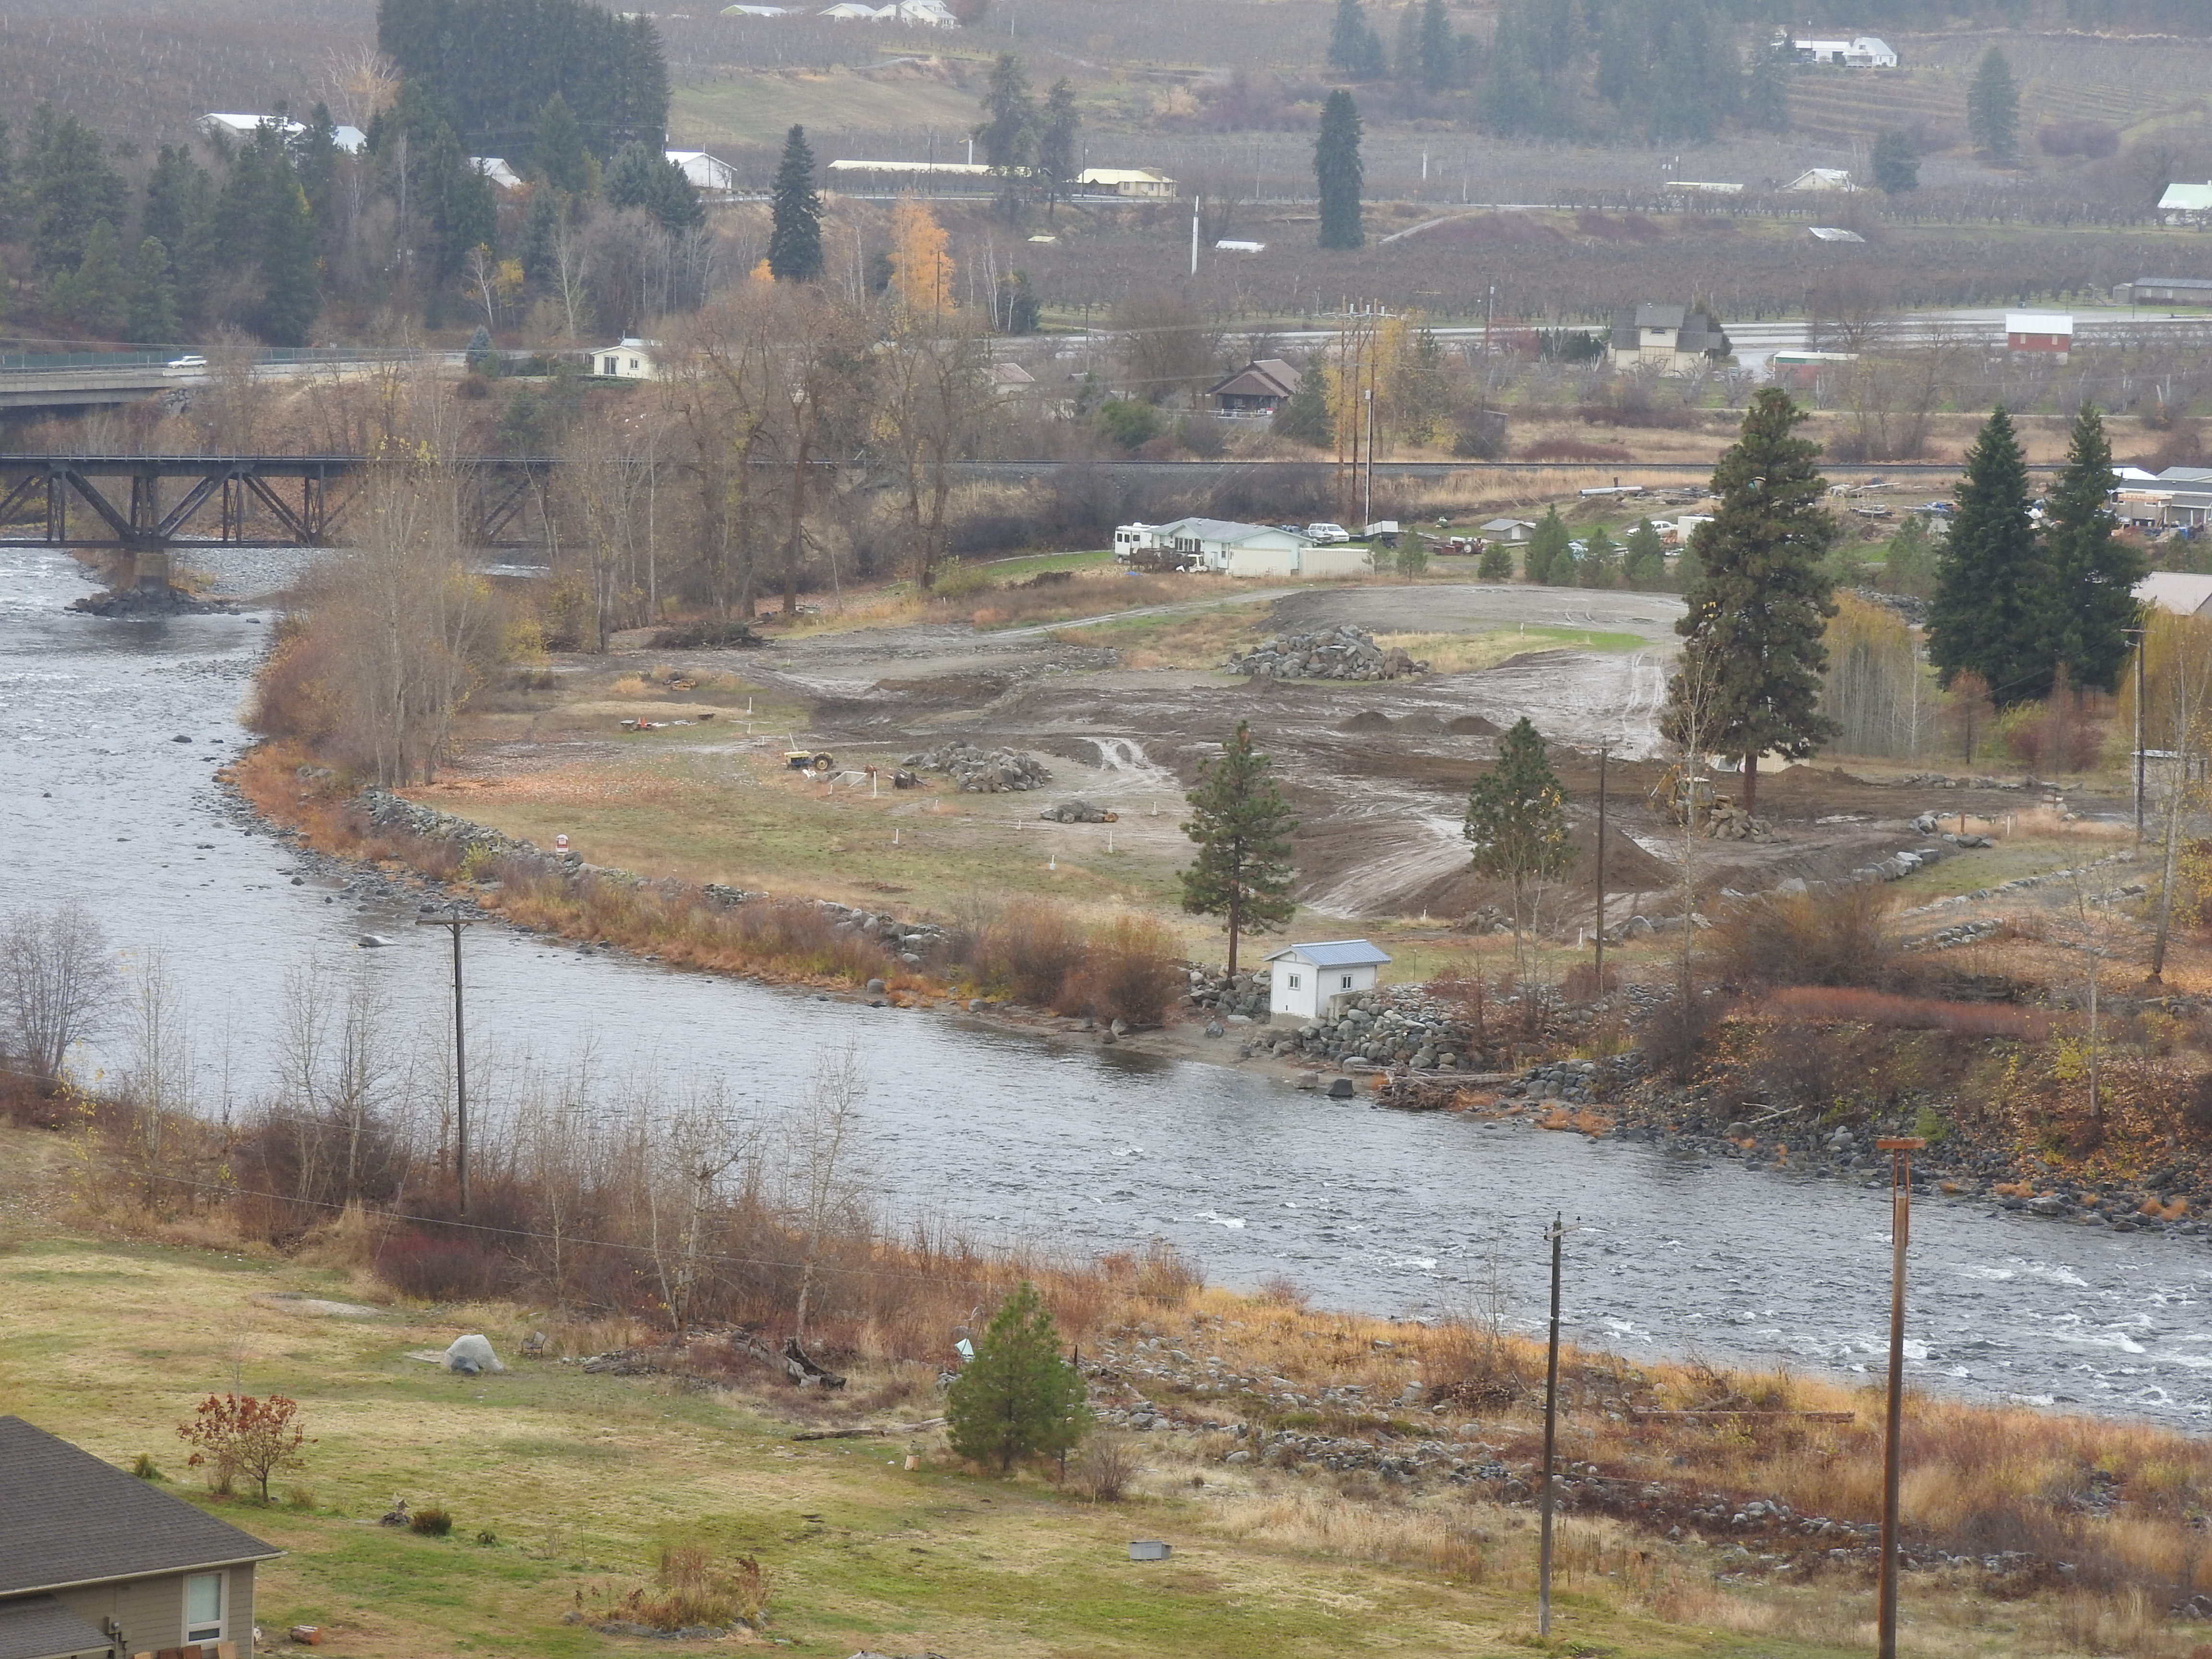 Photo showing illegal construction work on Kinzel property along Wenatchee River in Chelan County.